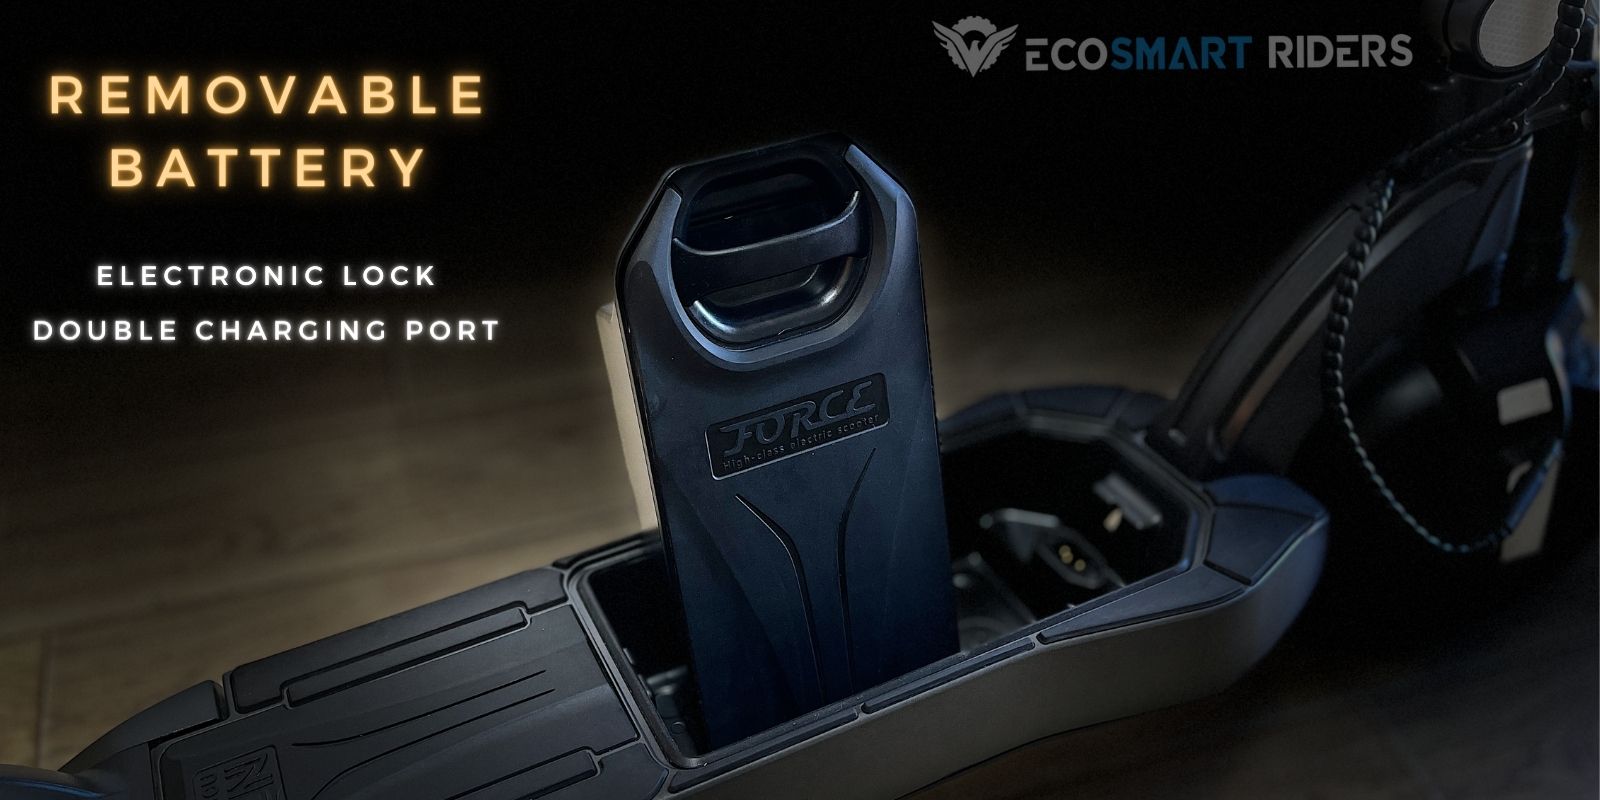 New Mercane FORCE with Removable Battery | Ecosmart Riders